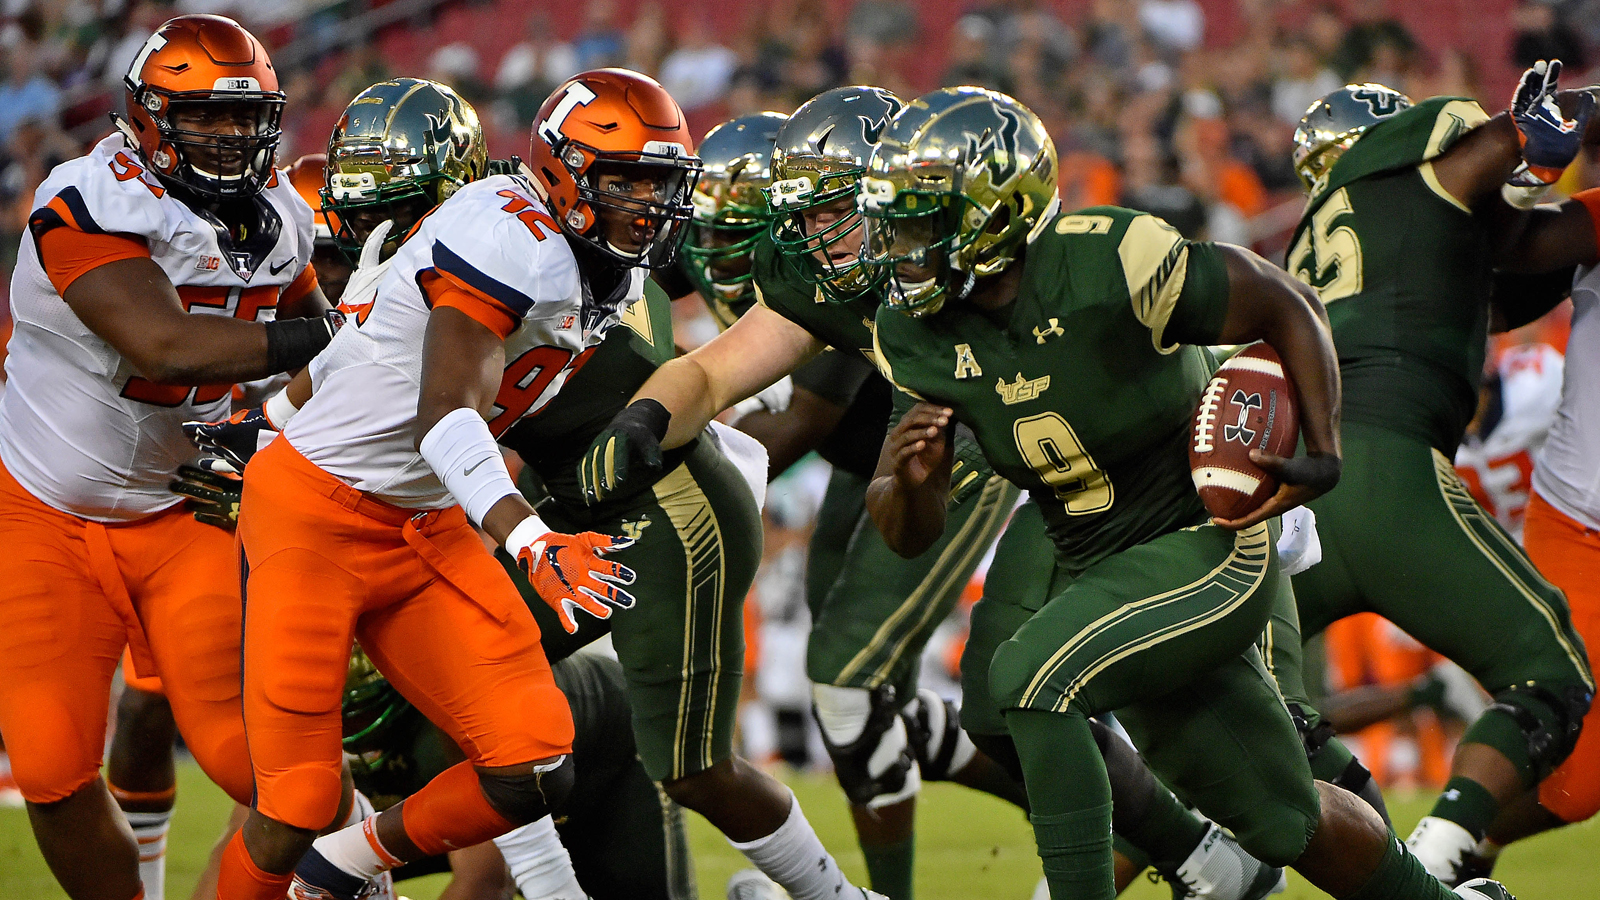 USF has 3 players top 100 rushing yards in dominating win over Illinois